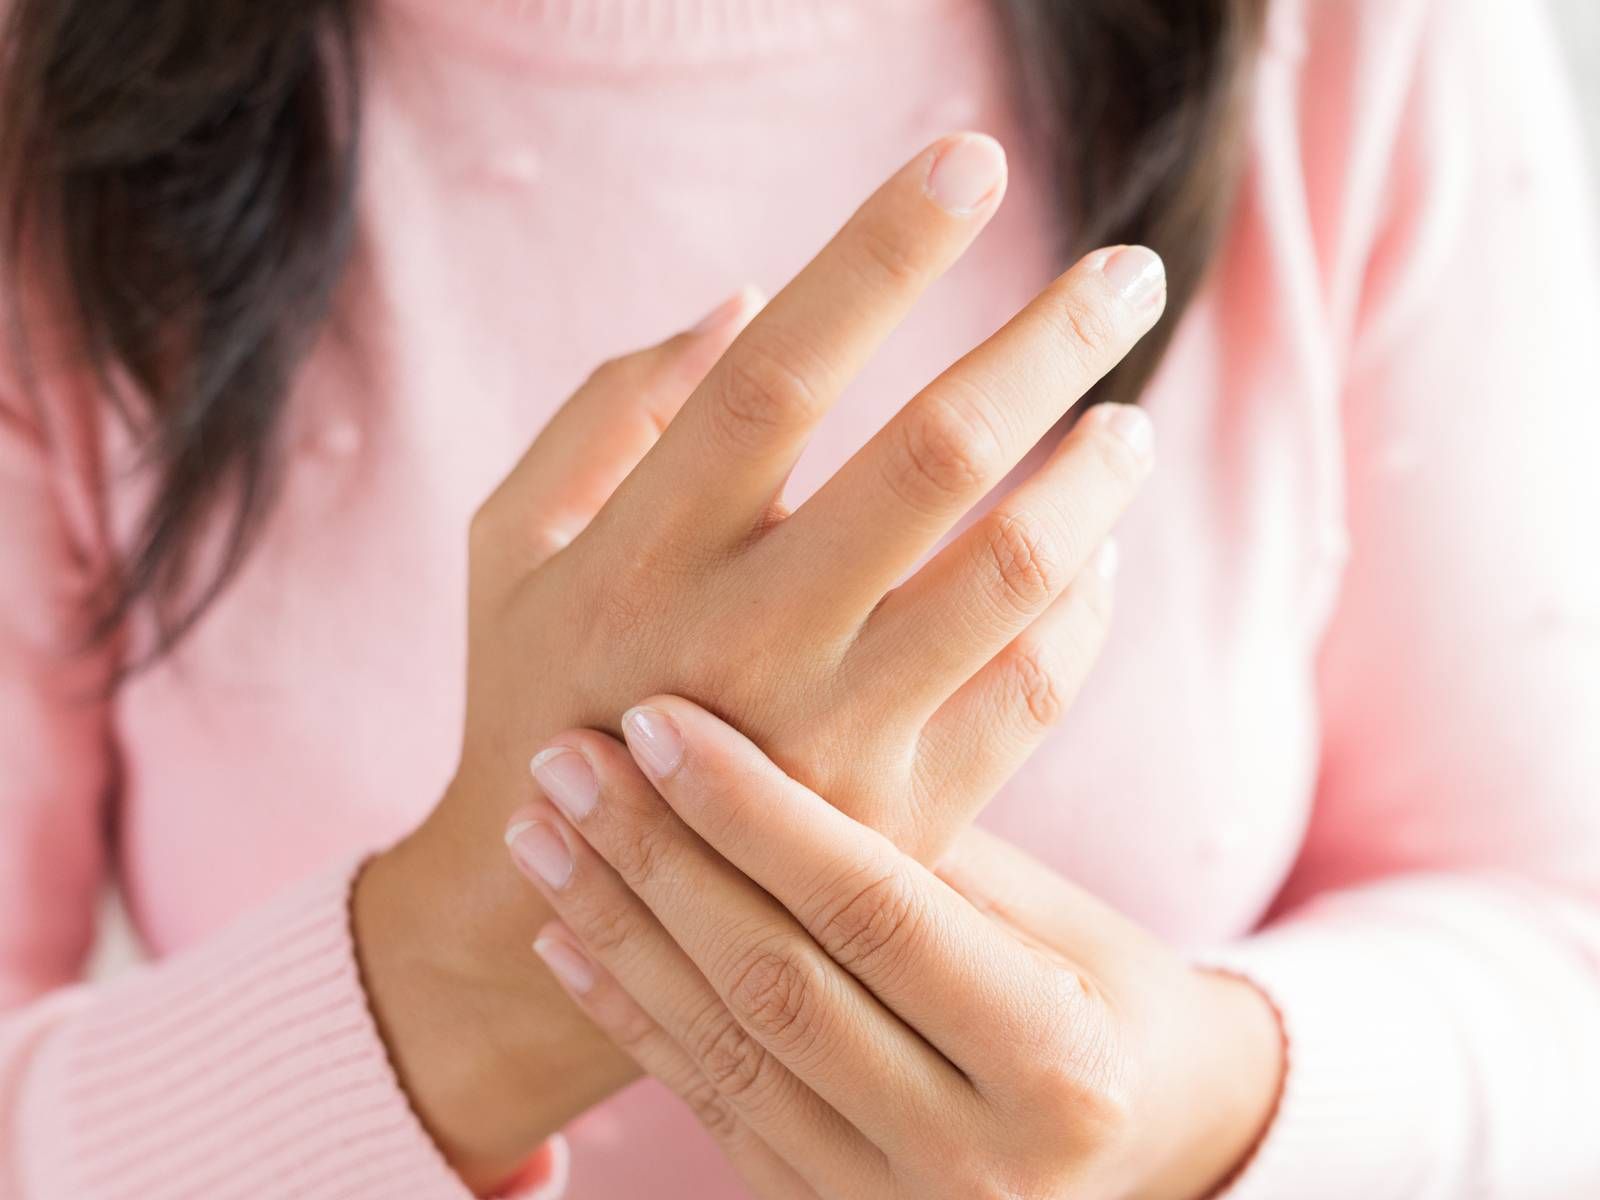 Consult with a doctor or dermatologist if you are concerned about any nail abnormalities.